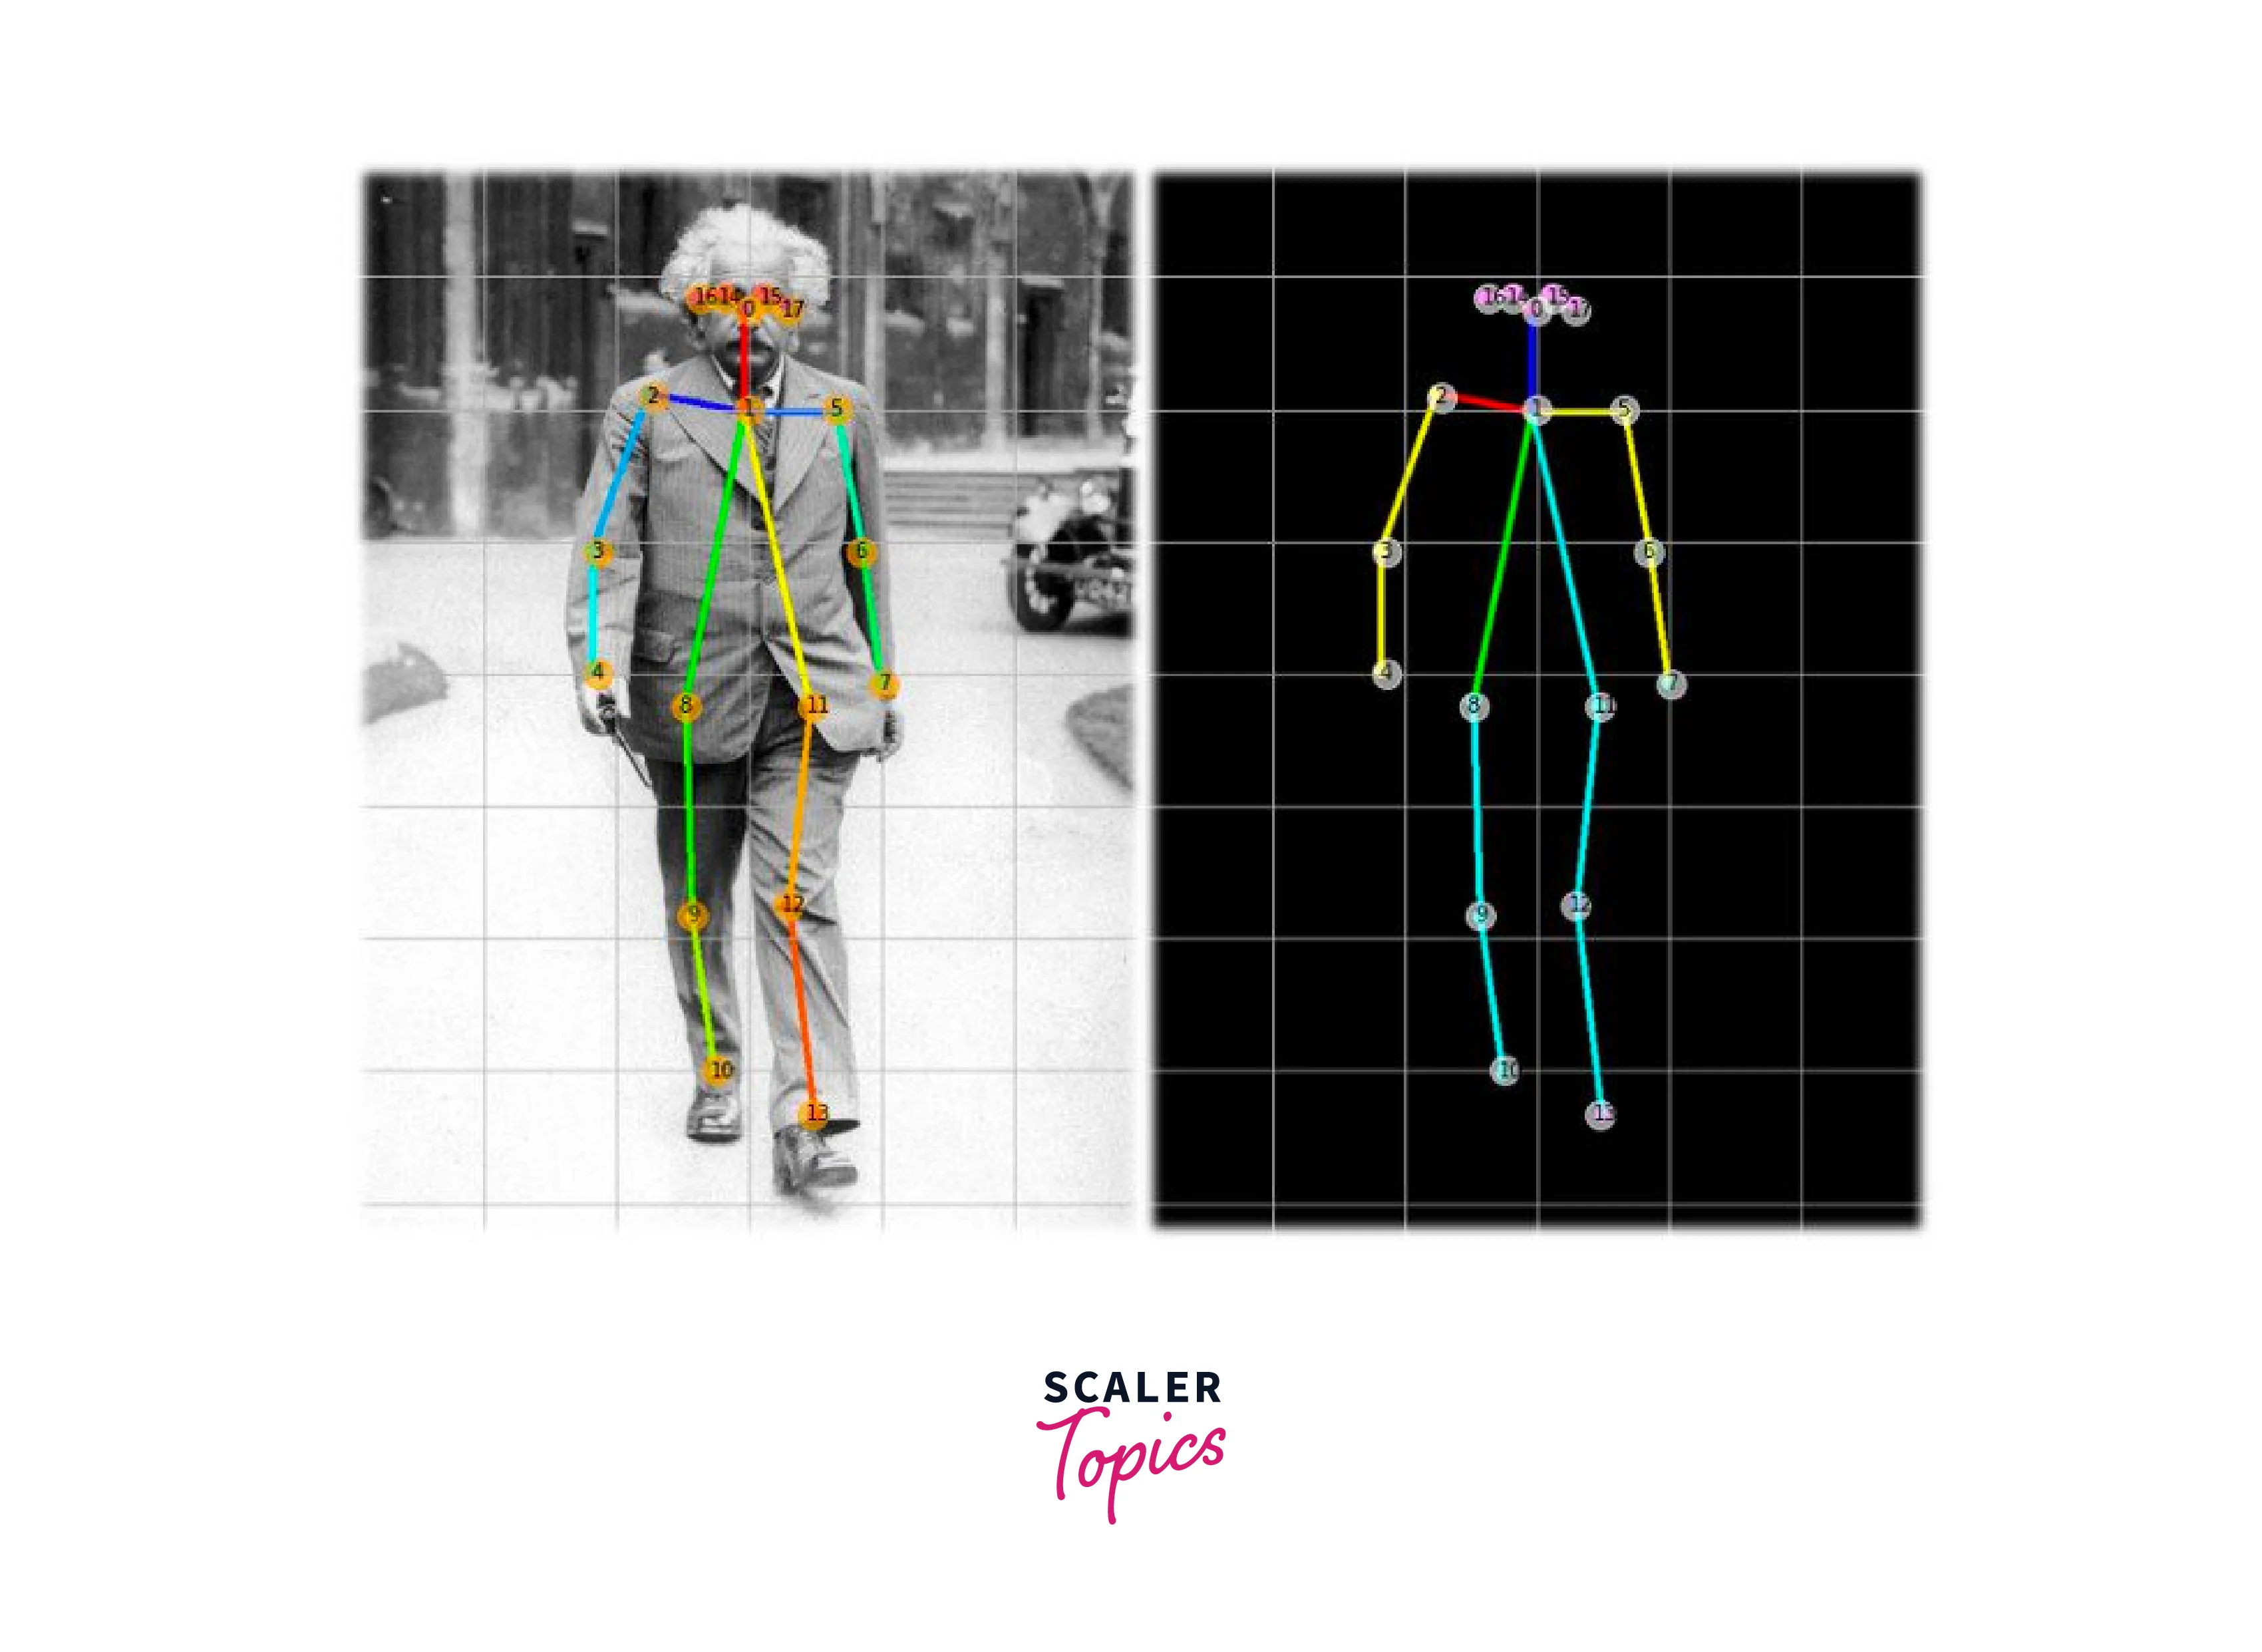 Human Pose Estimation in Deep Learning - Scaler Topics